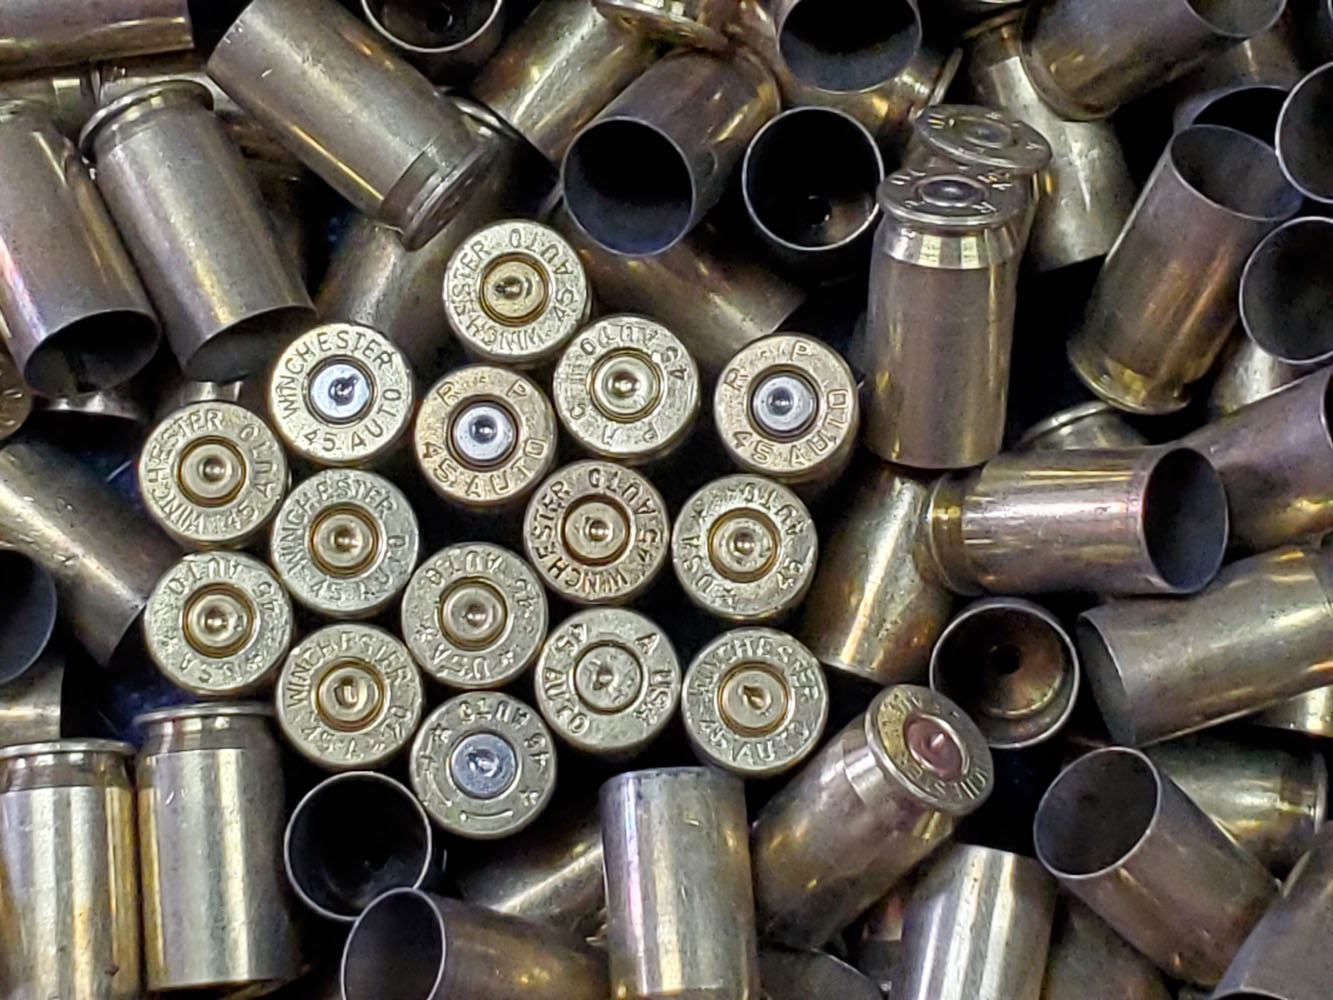 45 ACP Once Fired Brass LARGE PRIMER 1000 Count - Once Fired Brass